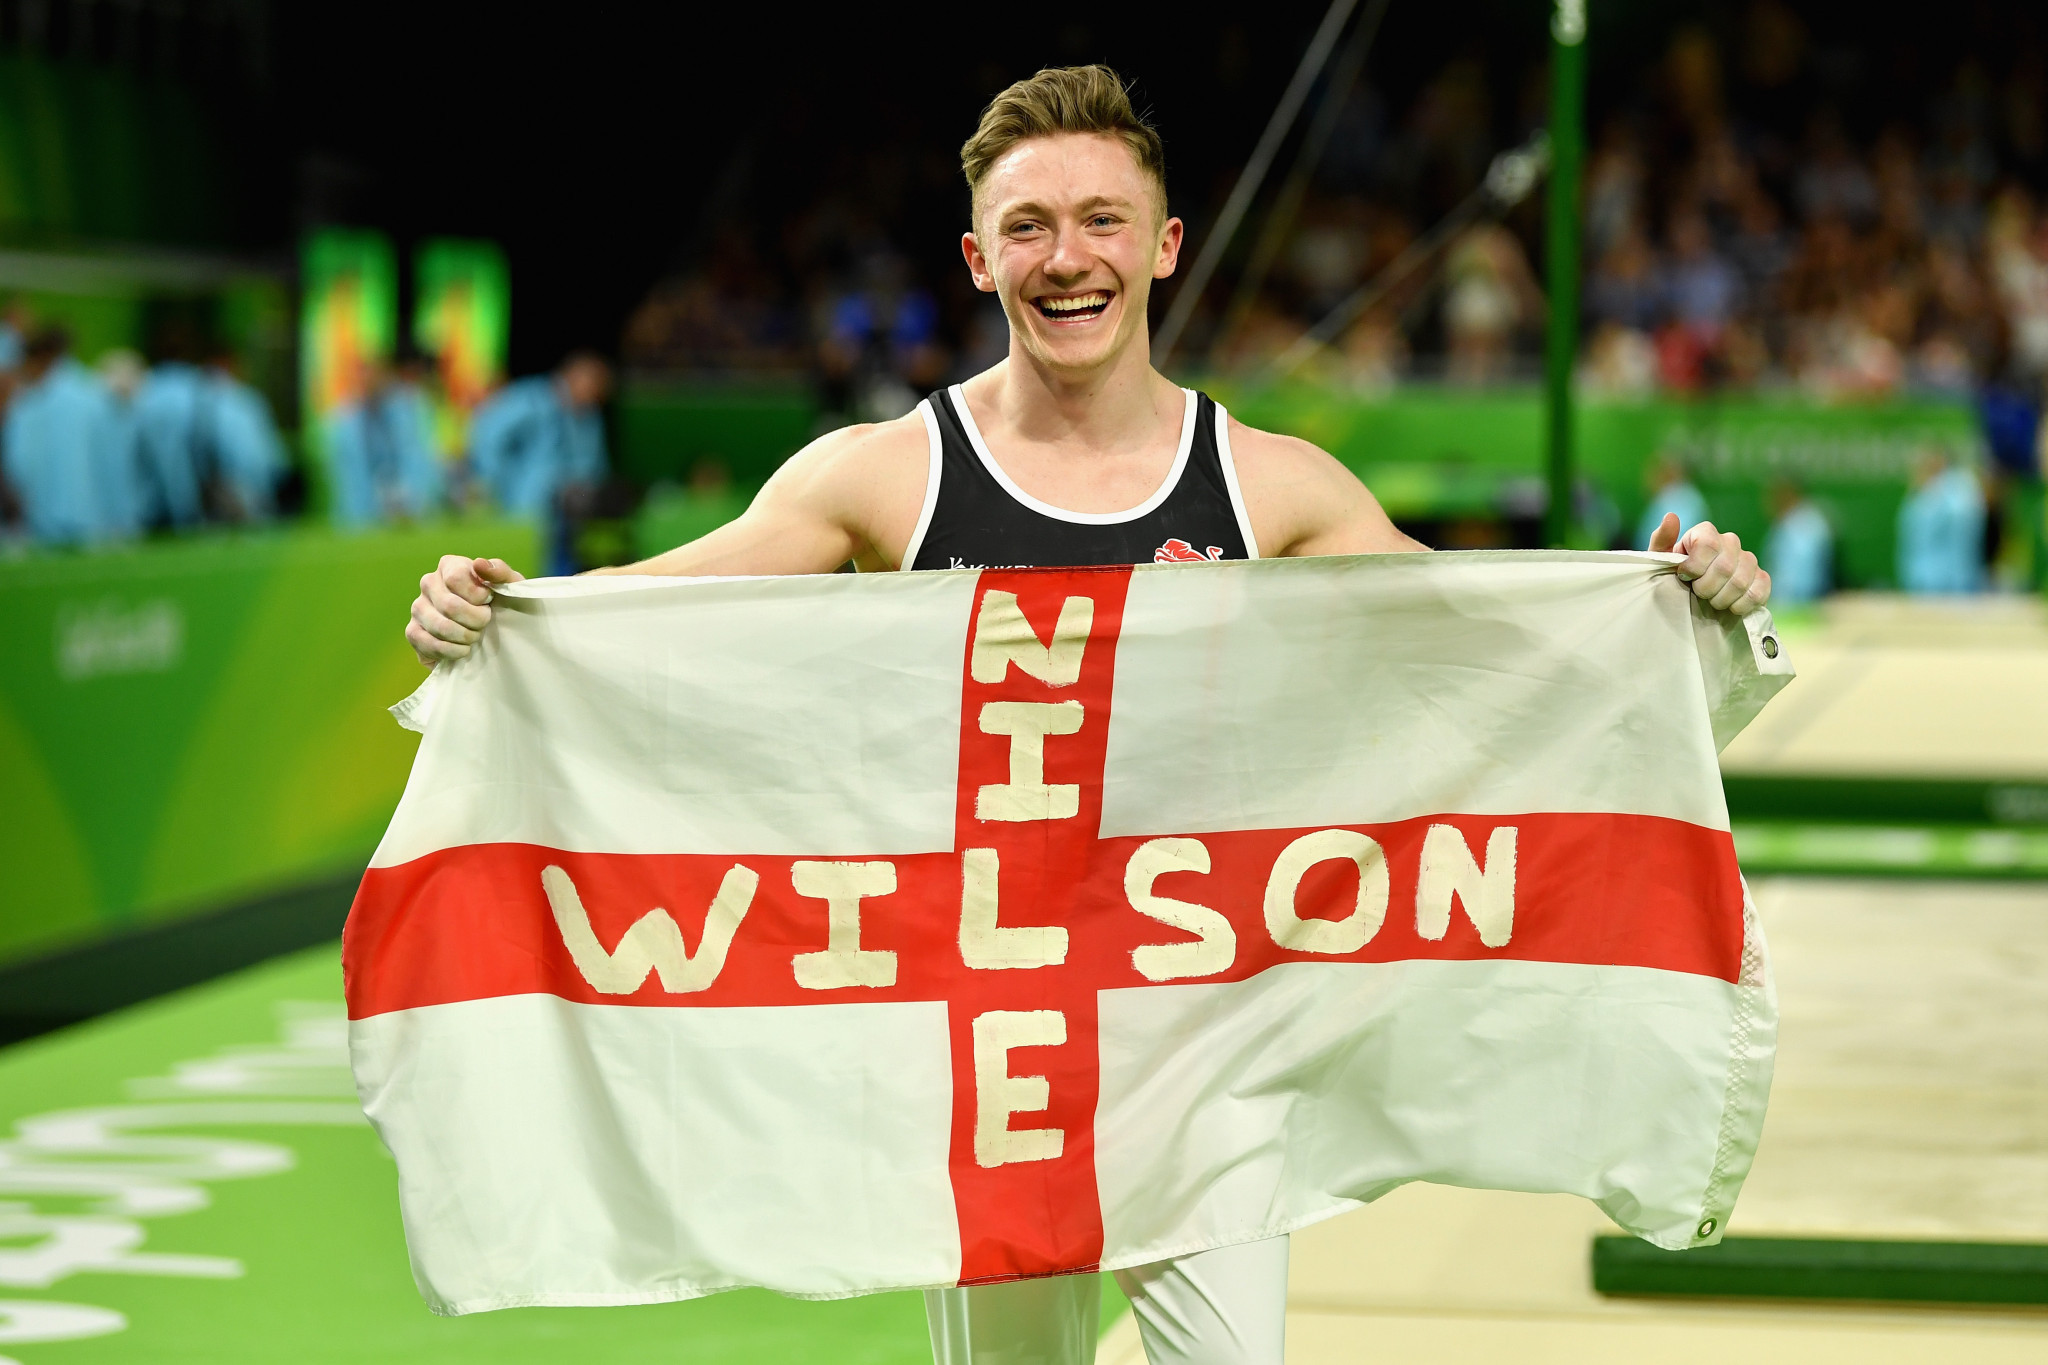 England's Nile Wilson dazzled his way to the men's all-around gymnastics title as he produced a stunning horizontal bar routine to edge compatriot James Hall ©Getty Images